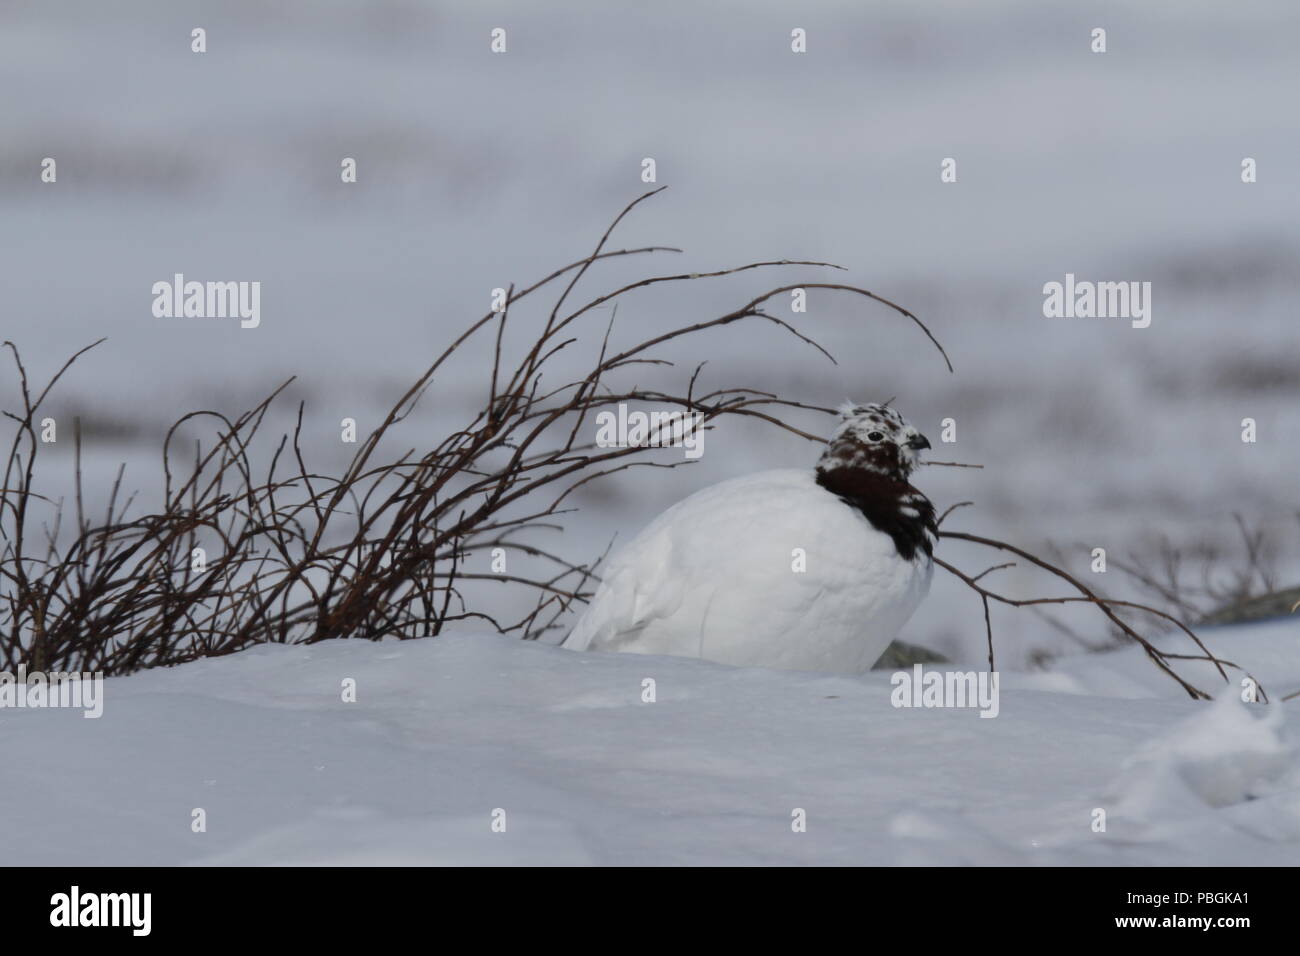 Adult male rock ptarmigan, Lagopus mutus, sitting in snow with willow branches in the background, Arviat, Nunavut, Arctic Canada Stock Photo